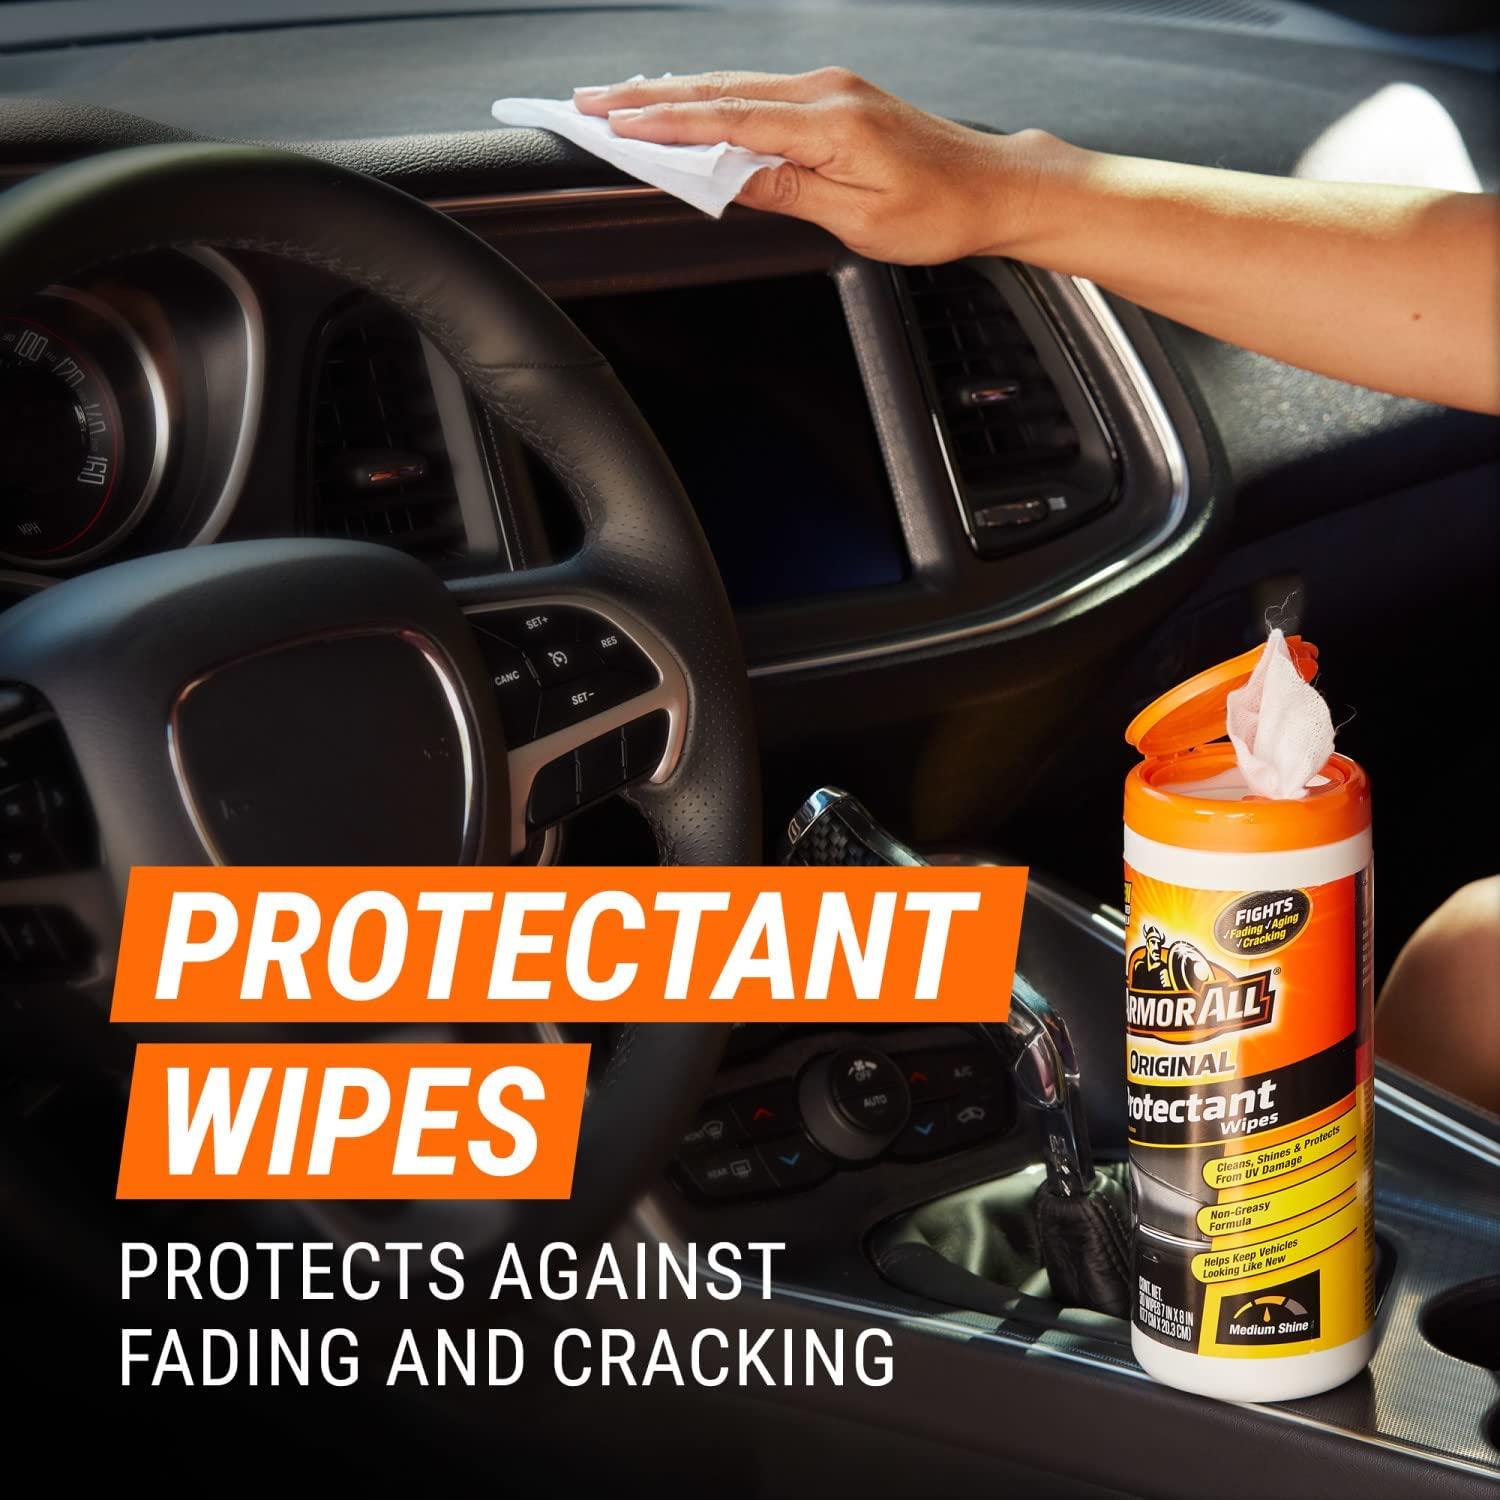 Car Protectant Wipes, Disinfectant Wipes, Glass Cleaner Wipes by Armor All,  Cleaning Wipes Variety Pack for Cars, Trucks, Motorcycles, 3 Each, 3 Pack  Disinfectant Wipes Variety Kit (3pk)